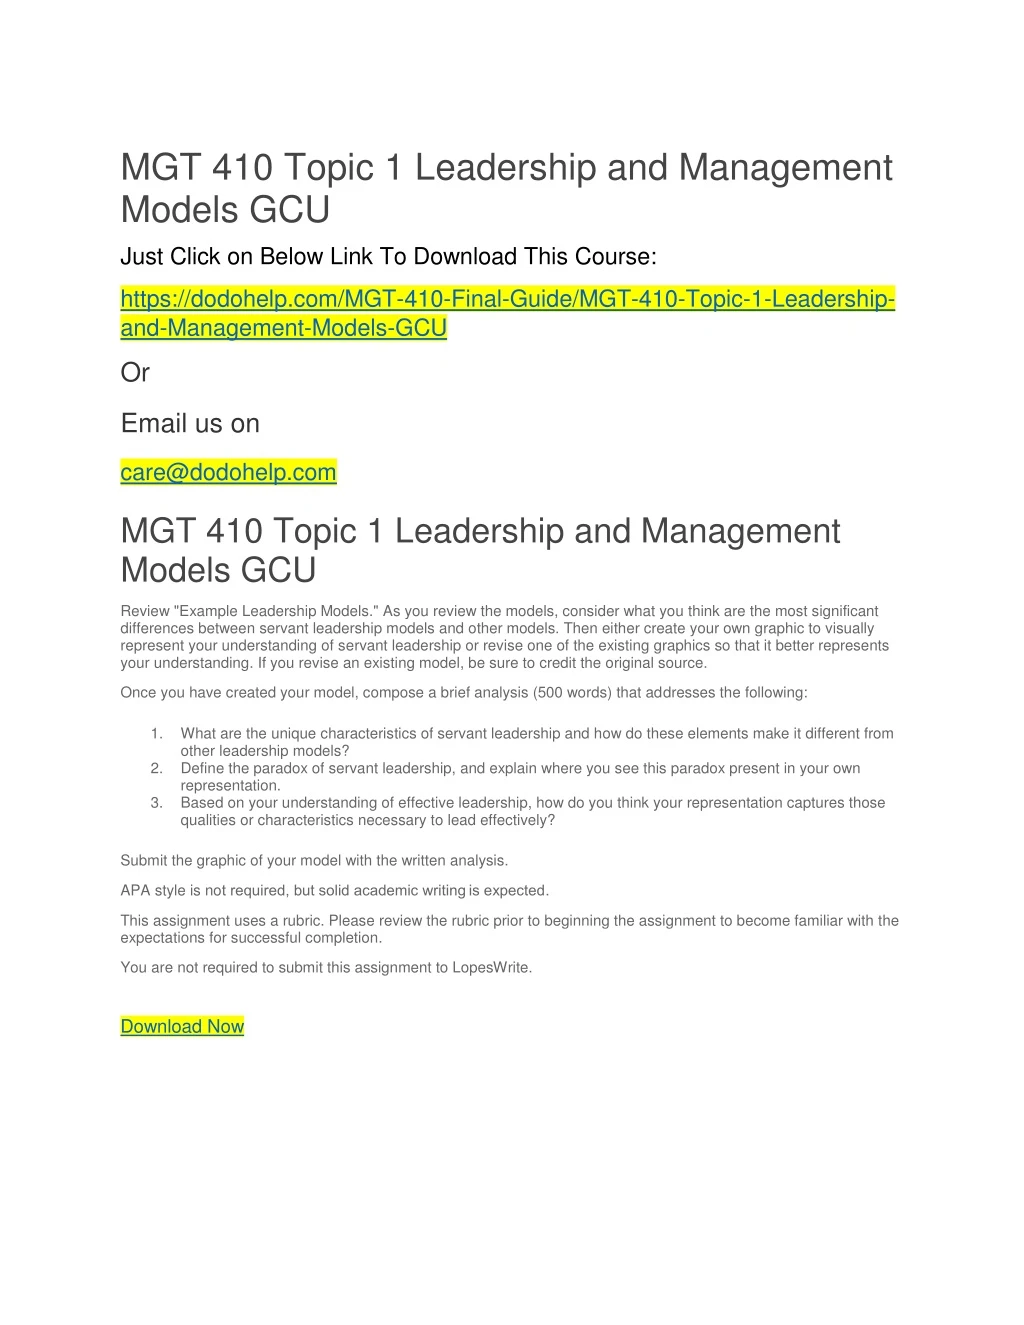 mgt 410 topic 1 leadership and management models